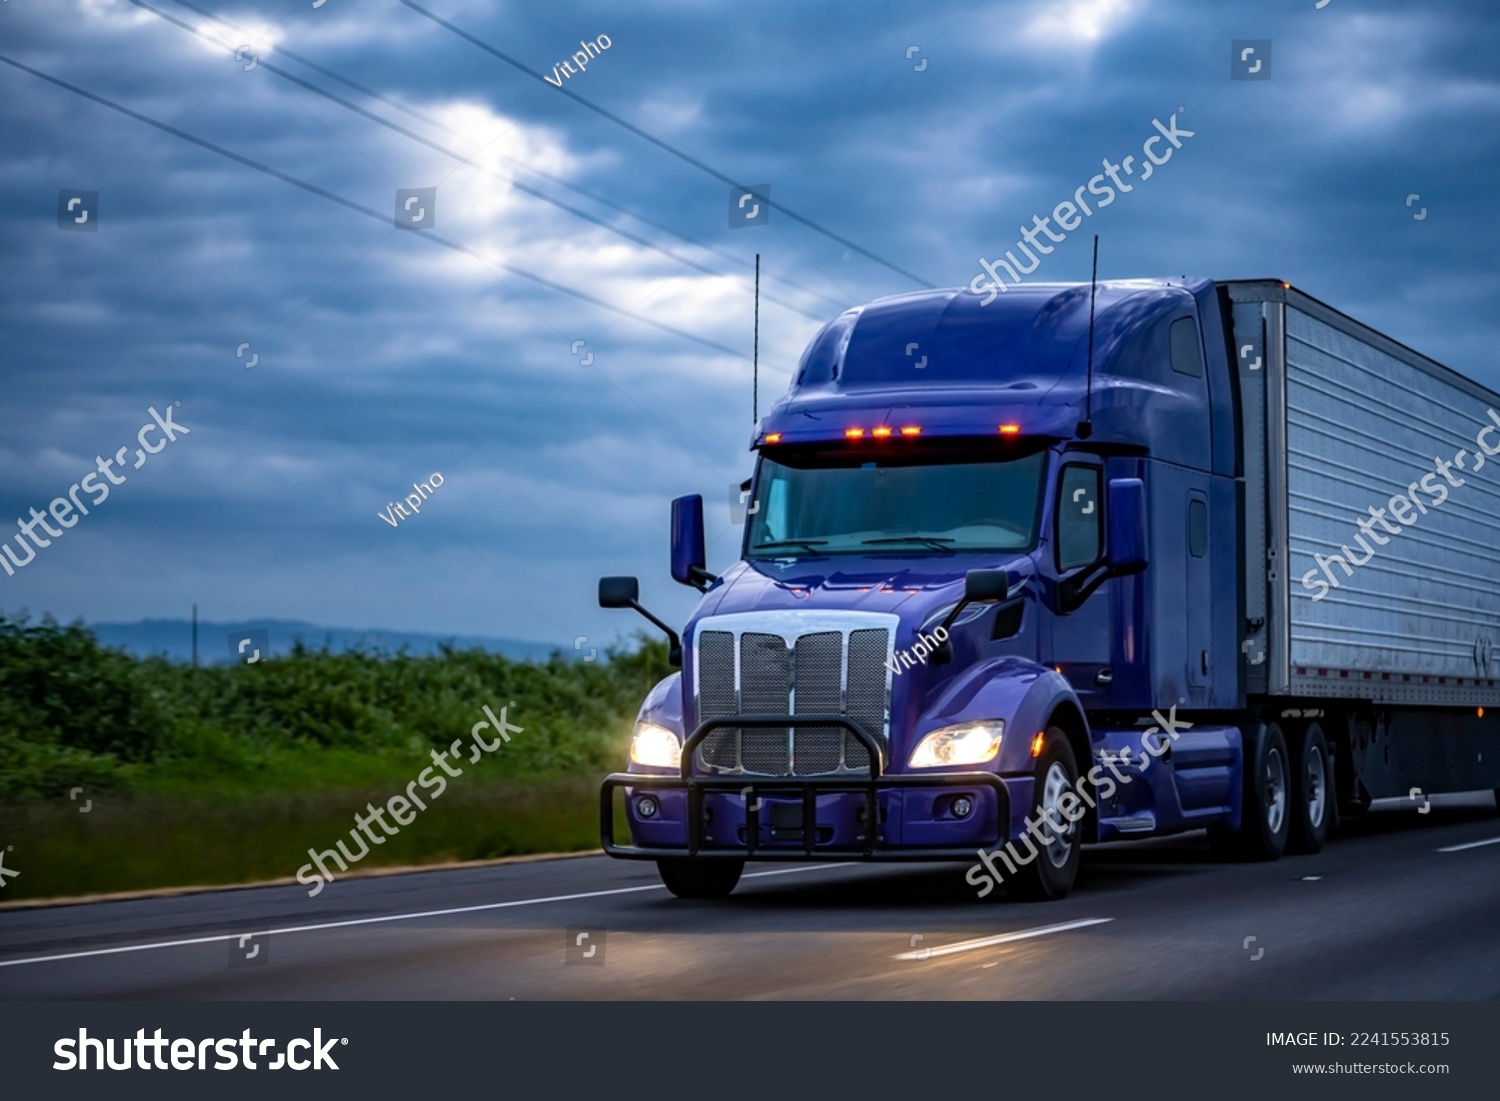 Blue industrial long haul Big rig semi truck with high cab transporting frozen commercial cargo in refrigerator semi trailer running on the evening wide highway road with storm clouds in Oregon #2241553815